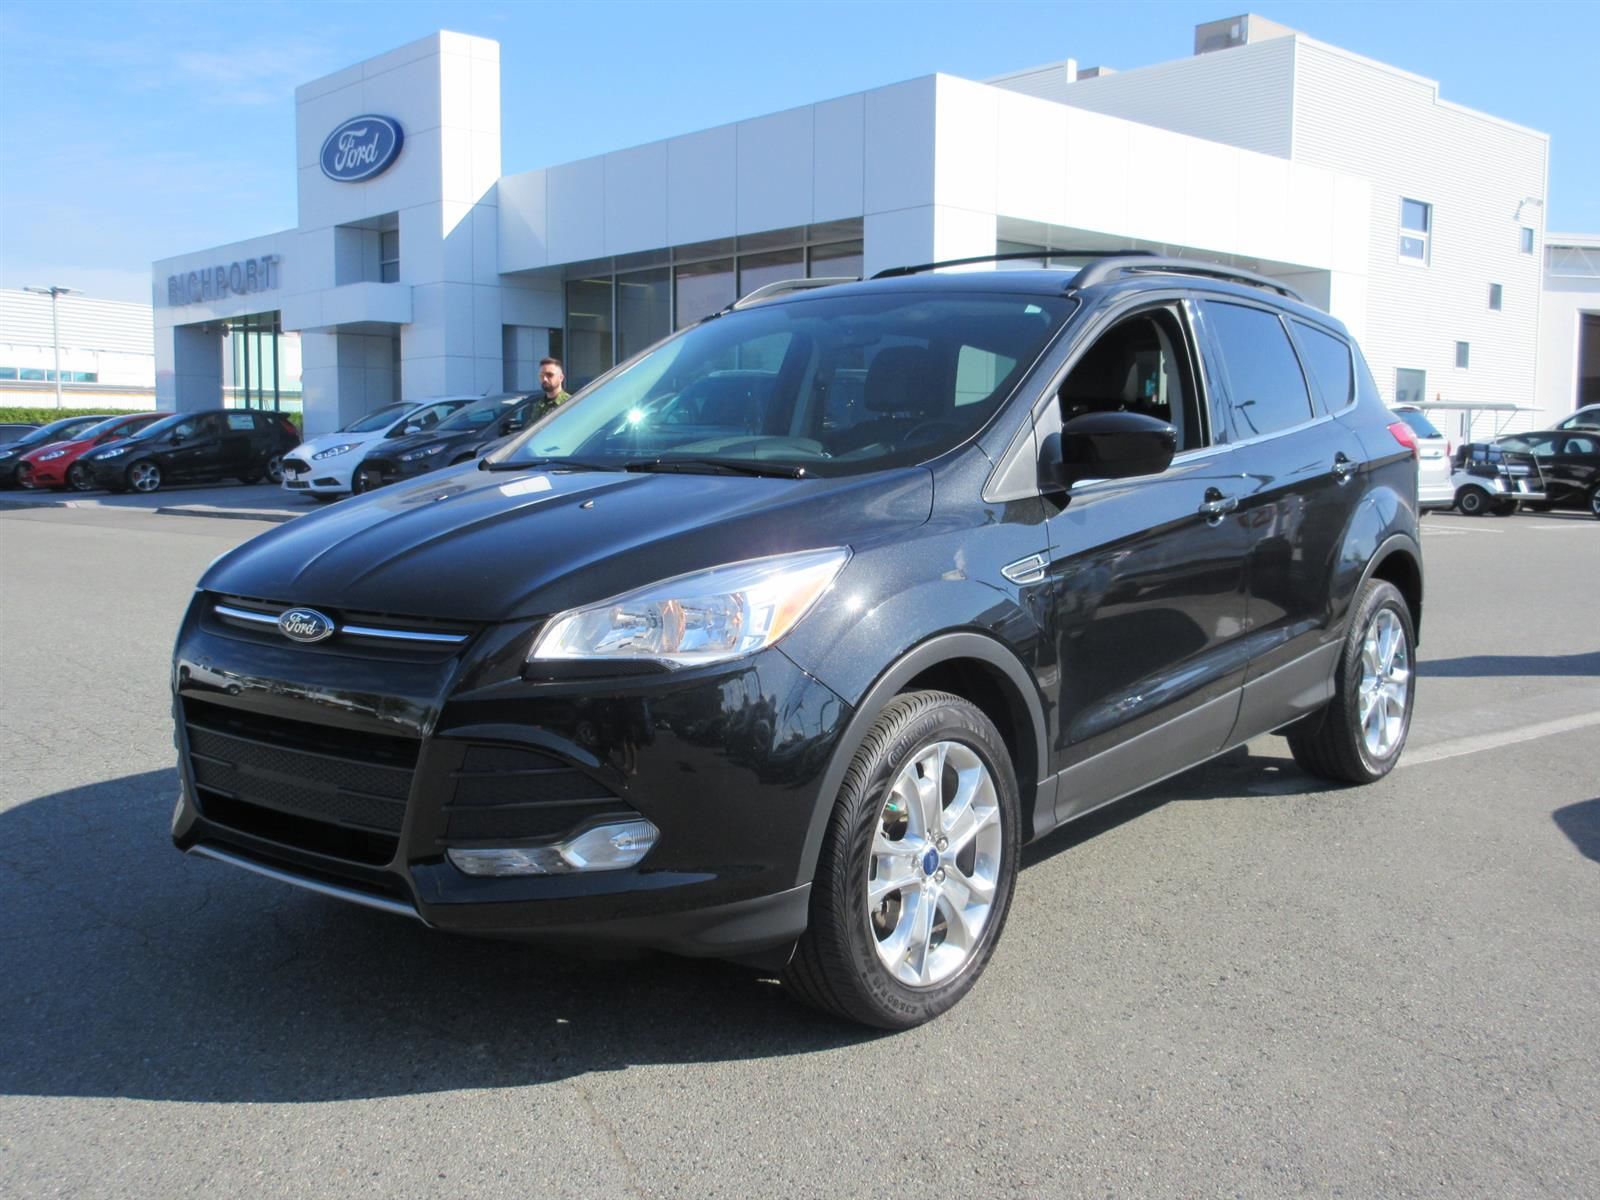 Richport ford used vehicles #2